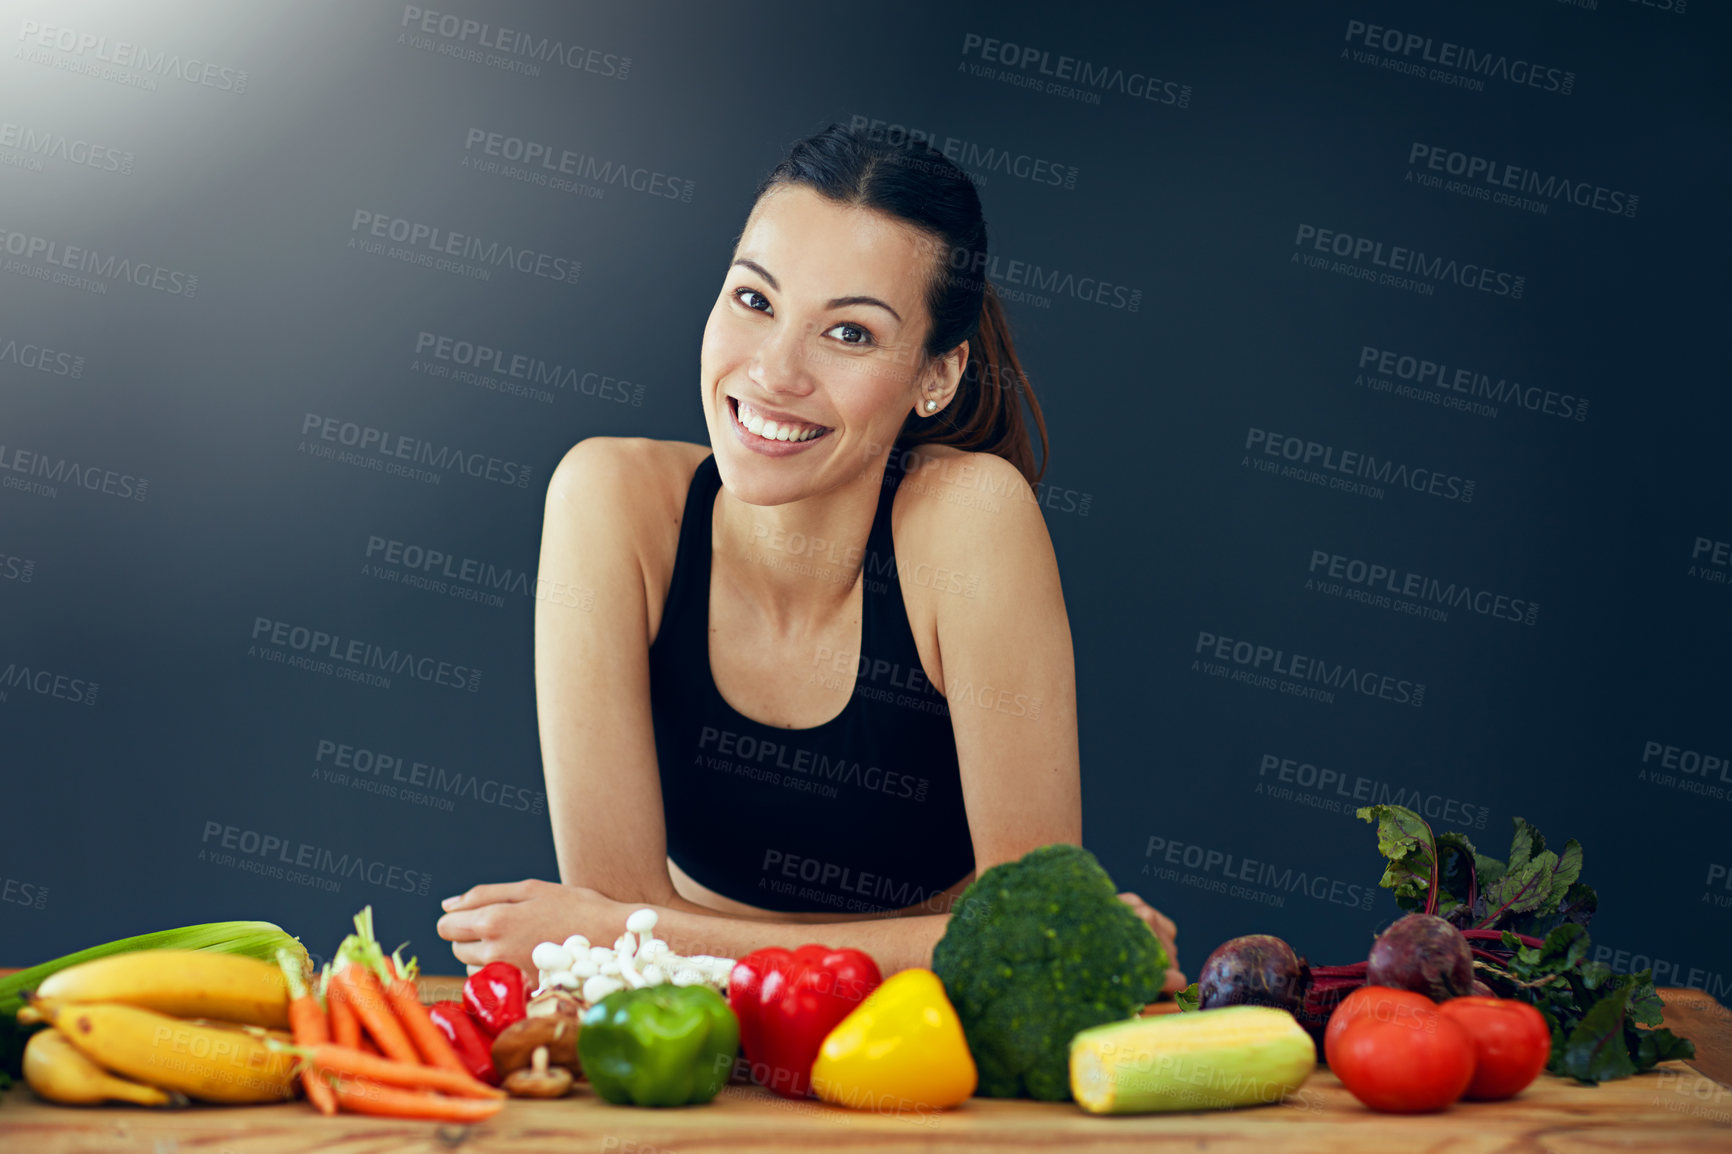 Buy stock photo Studio portrait of an attractive young woman posing with a variety of vegetables on the table